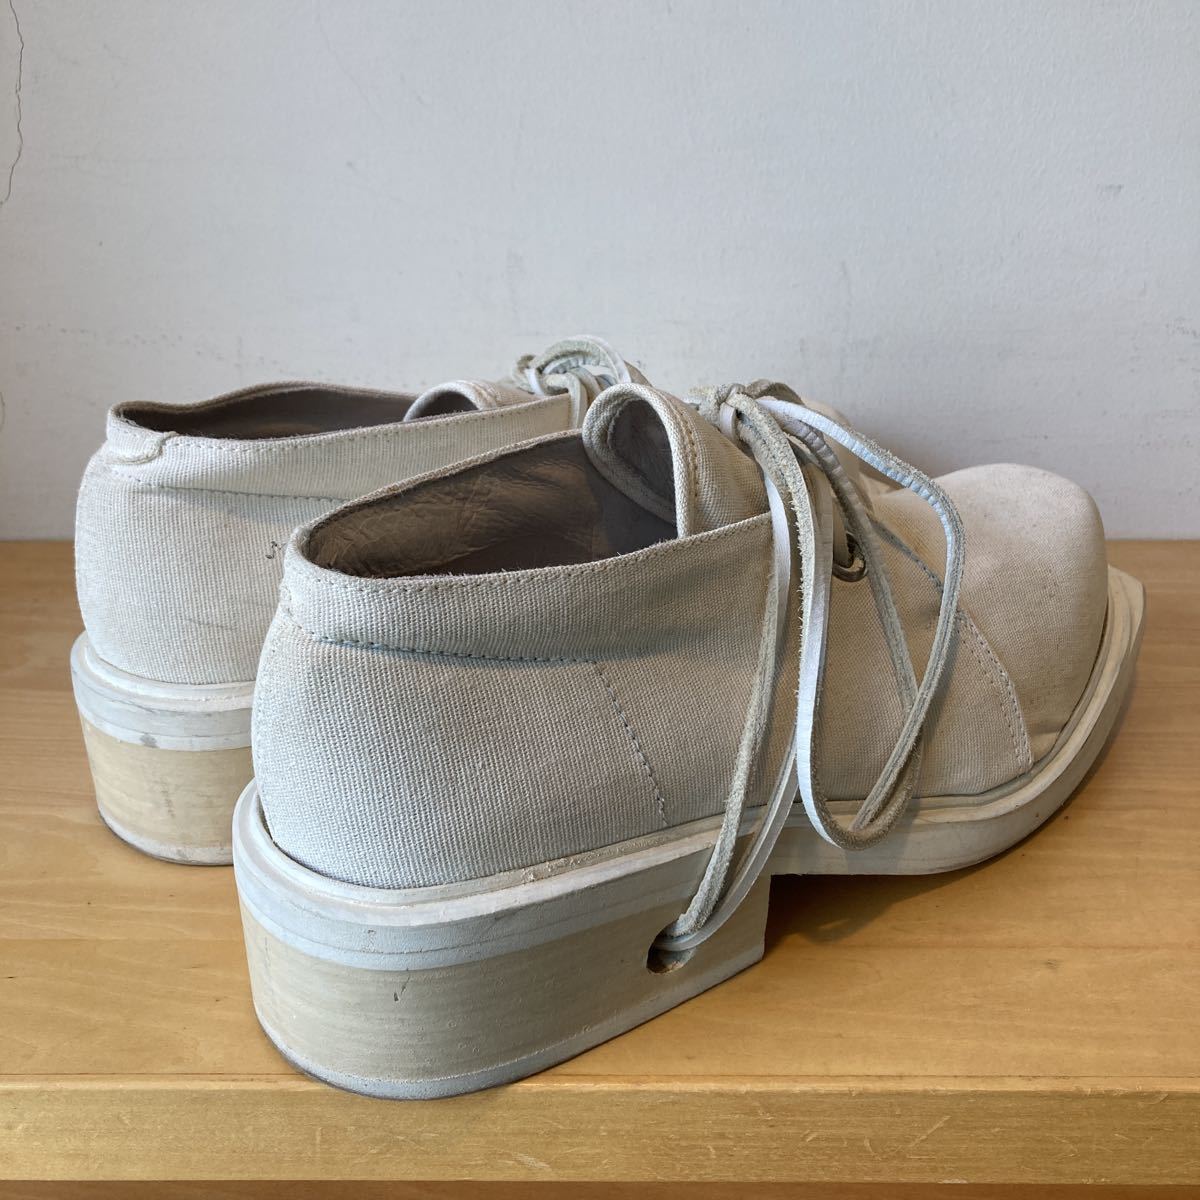 DIRK BIKKEMBERGS Dirk Bikkembergs 43 canvas lace up shoes парусина Vintage Anne towa-p6 архив white белый 